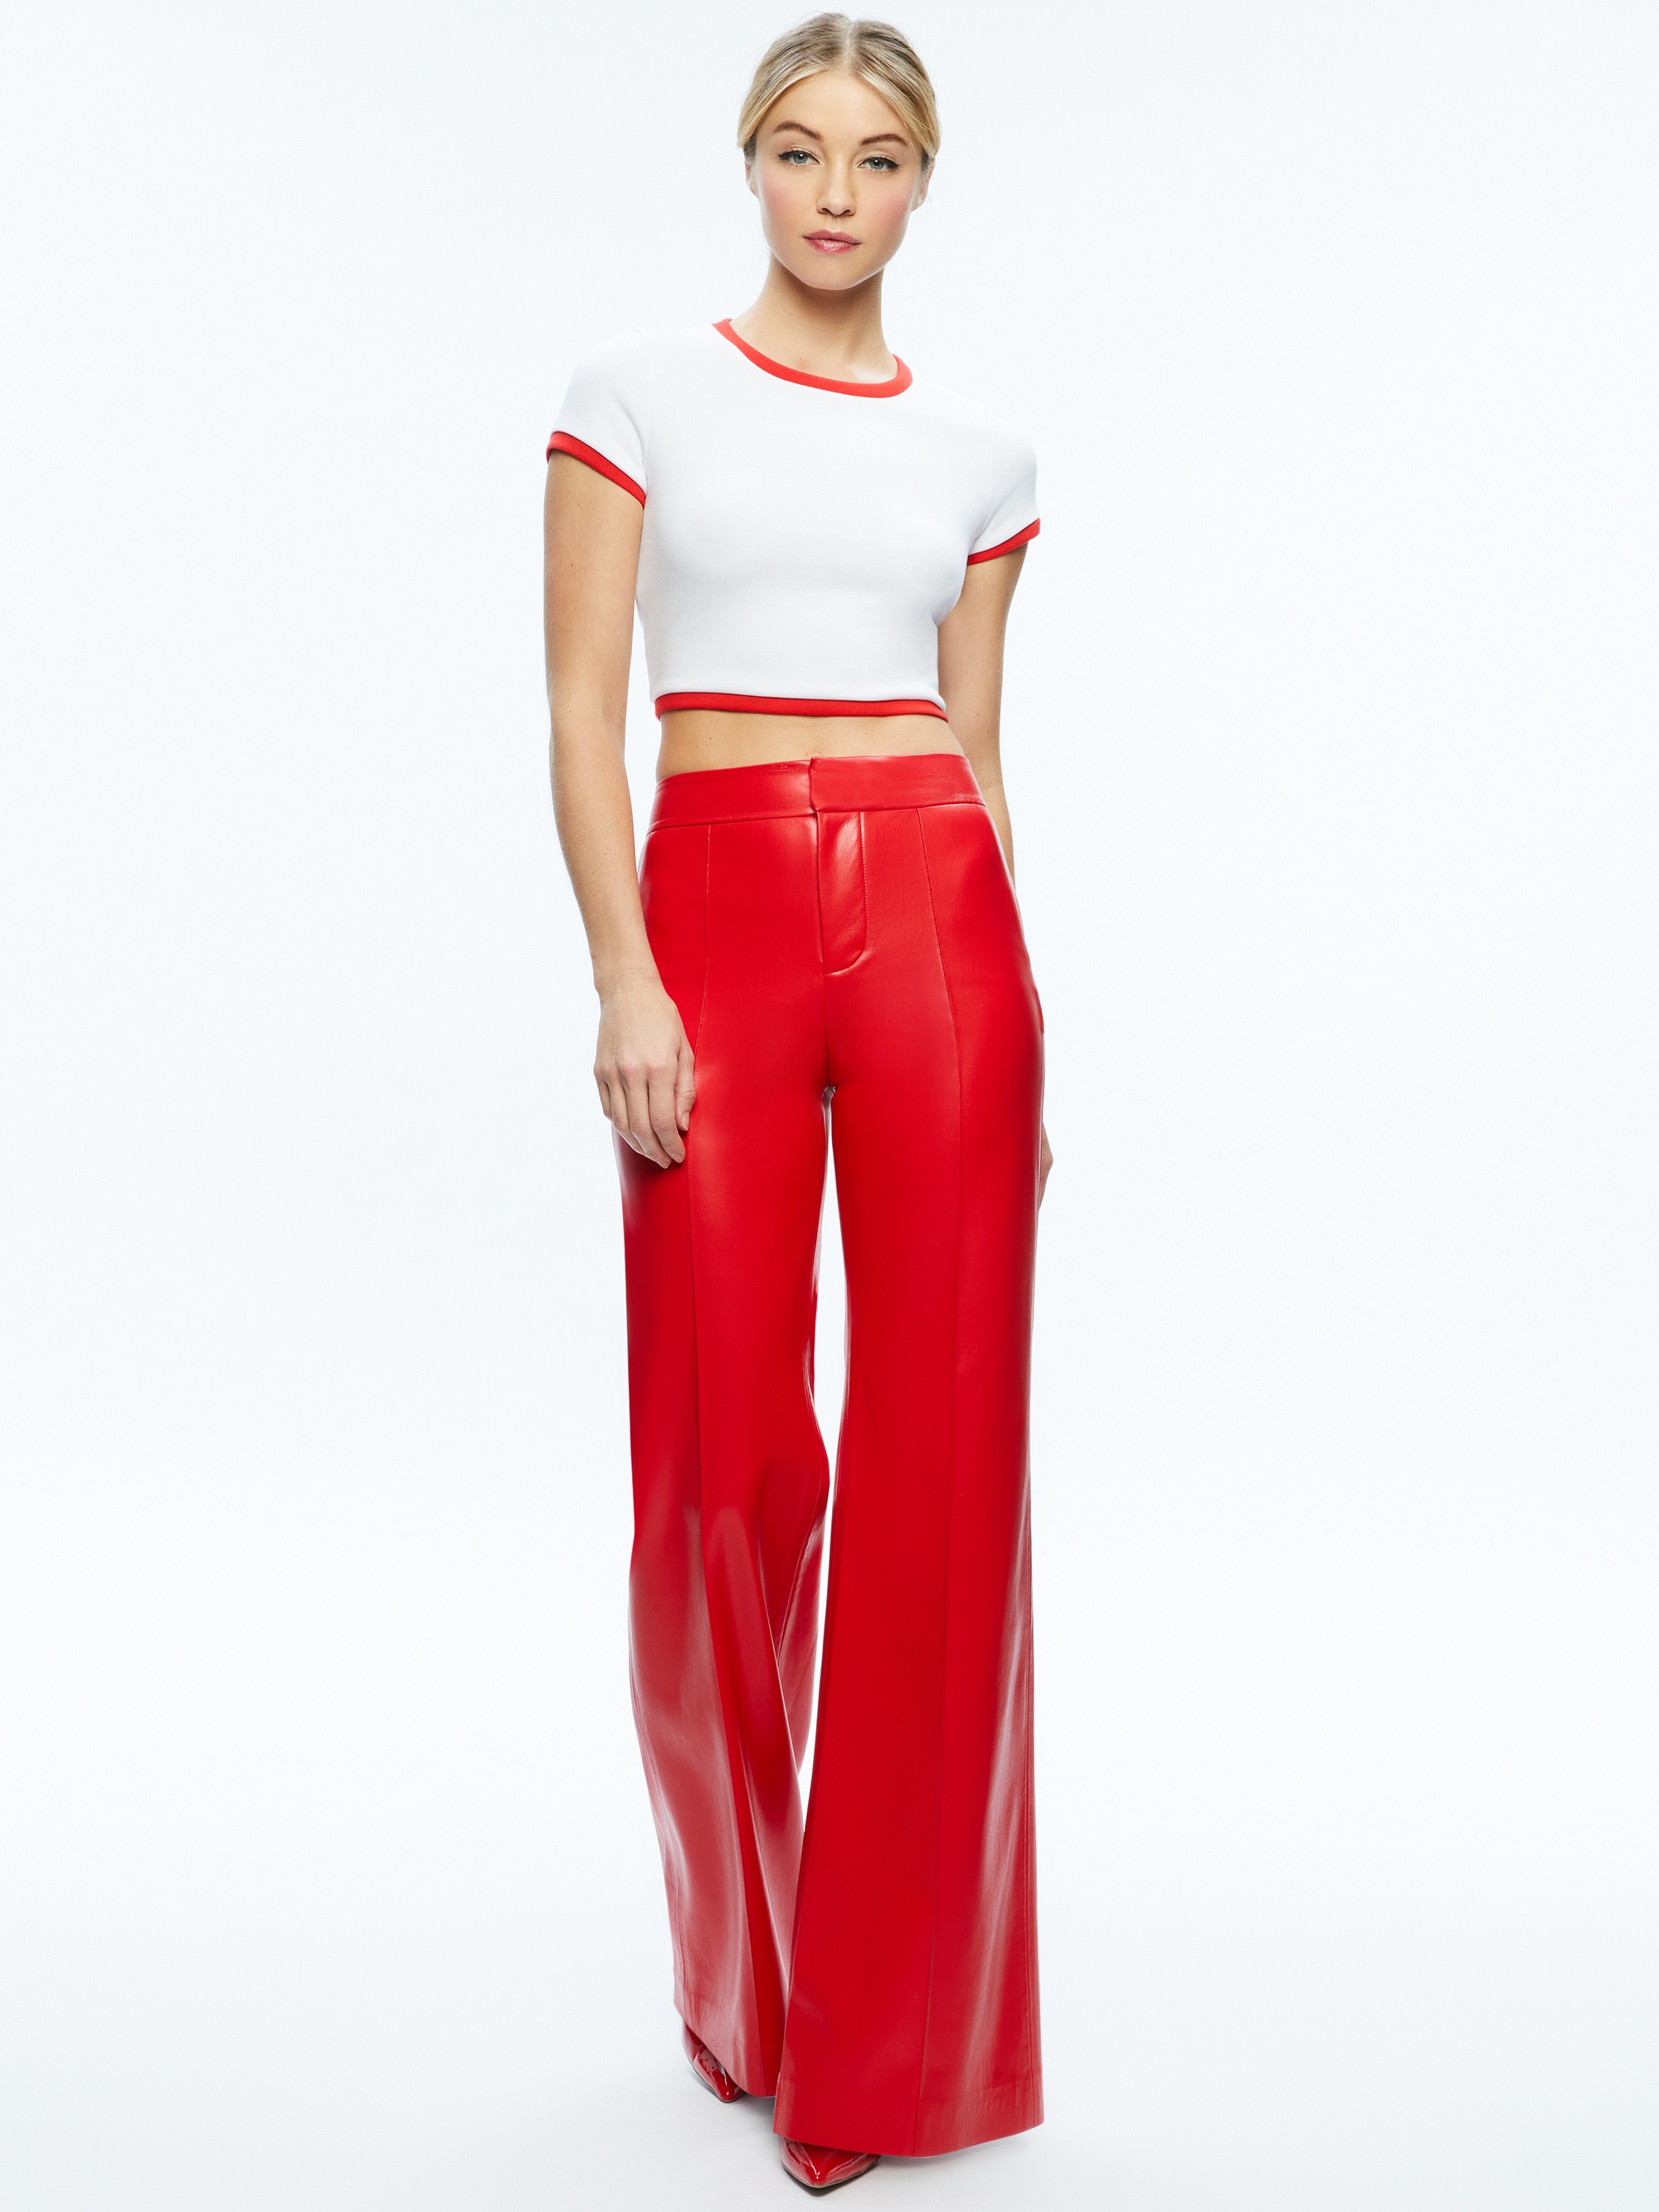 DYLAN HIGH WAISTED VEGAN LEATHER WIDE LEG PANT - 5